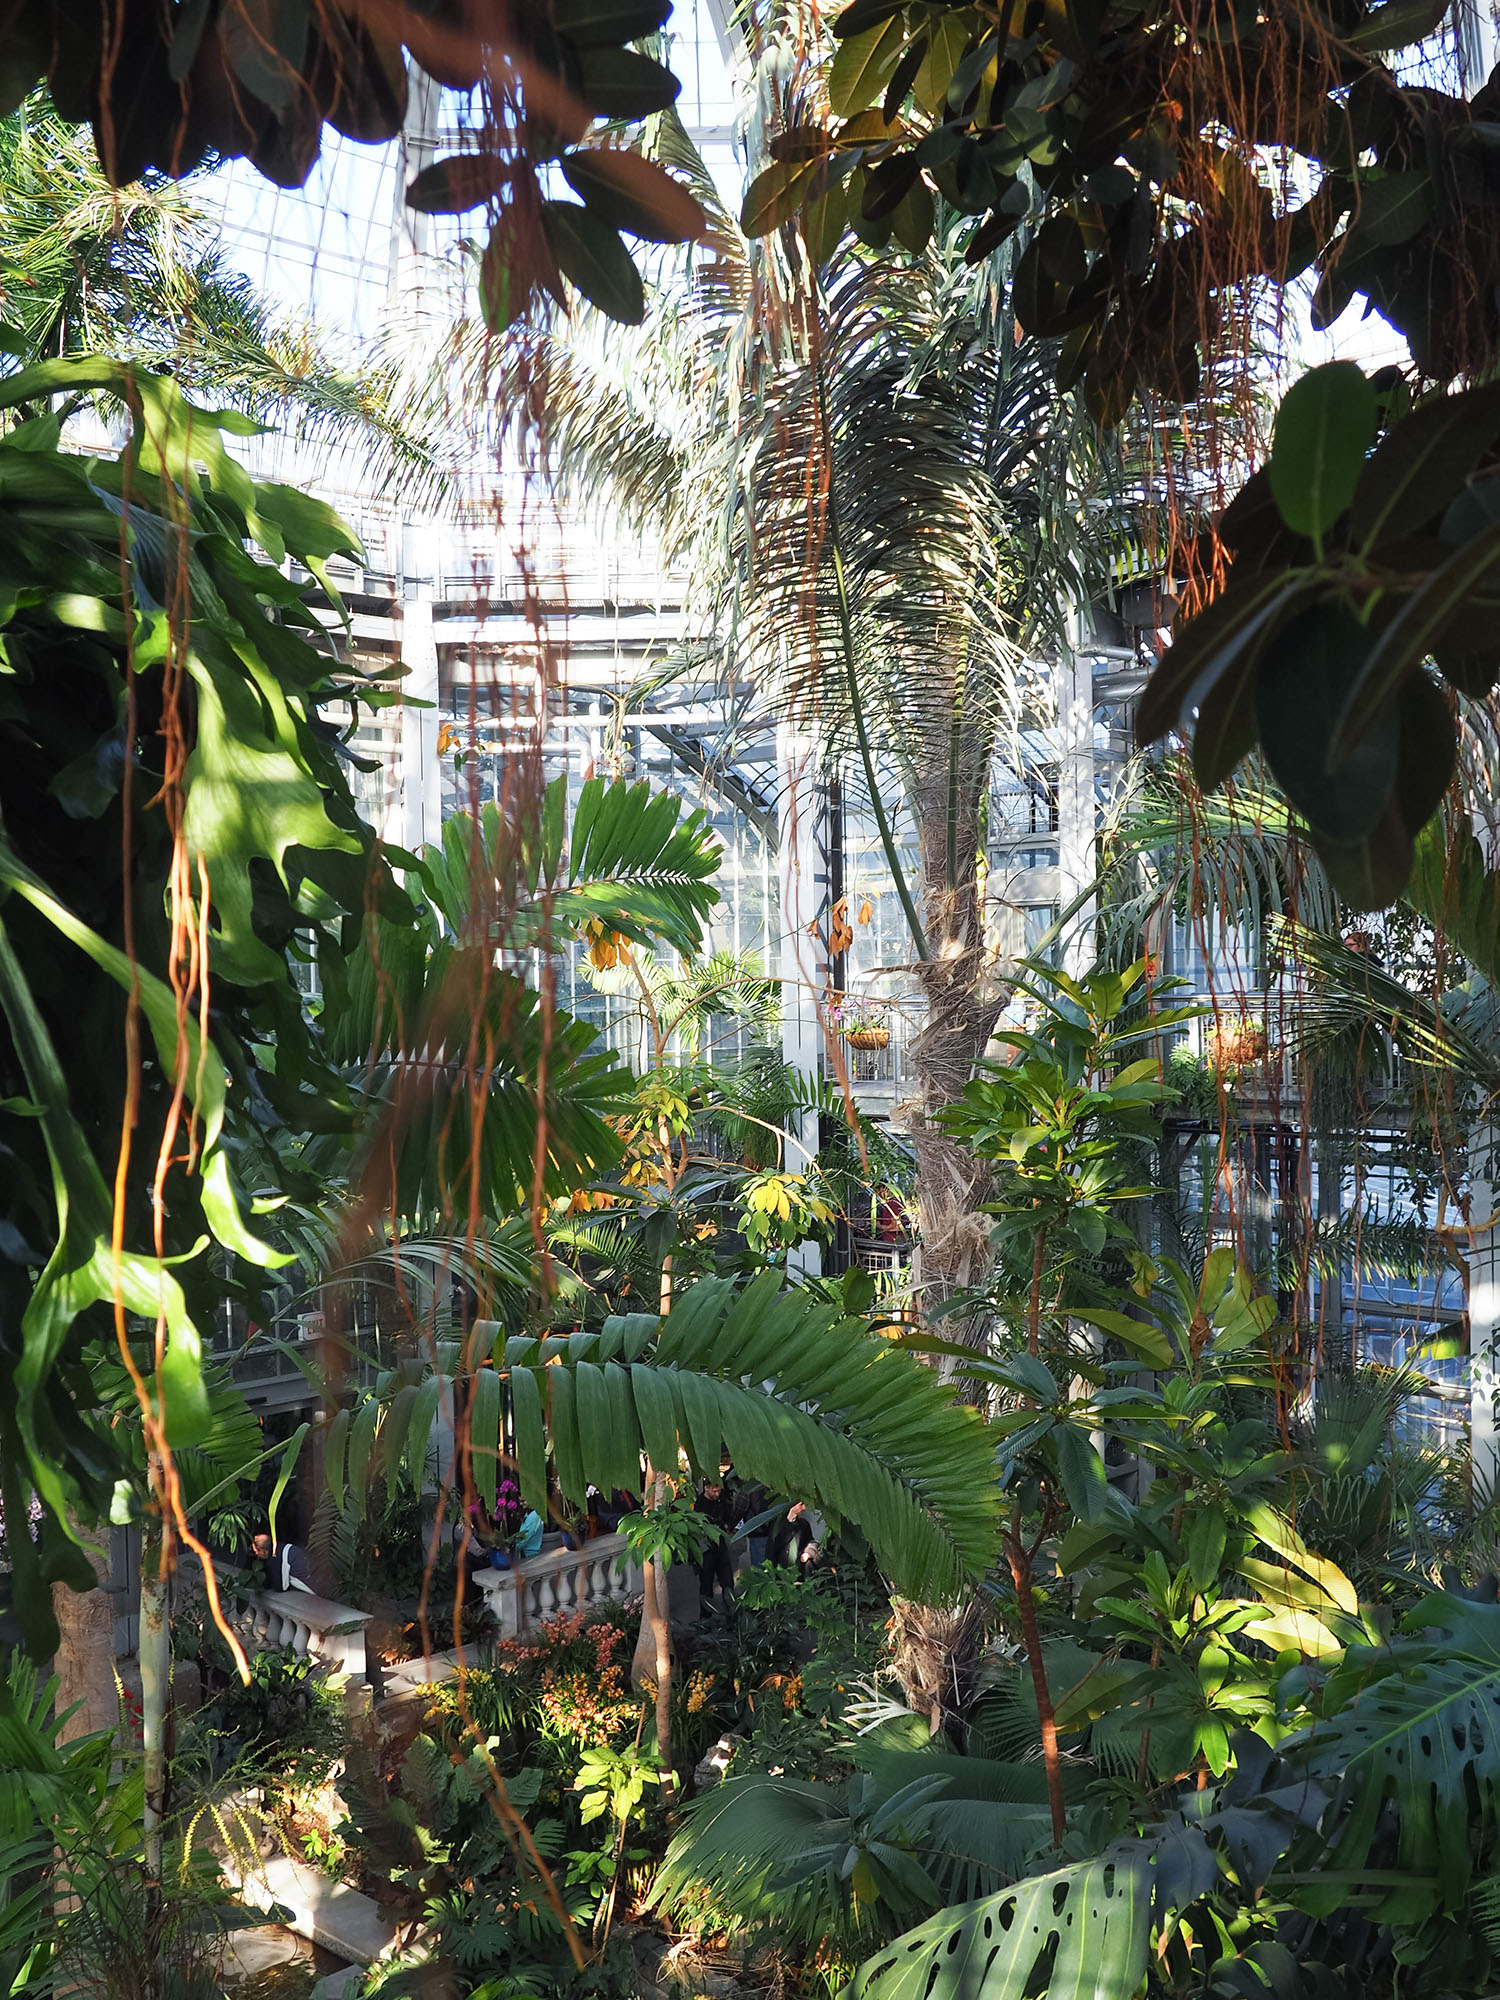 Palm trees grow in the greenhouse at the United States Botanic Garden in Washington DC, as captured by Winnipeg travel blogger Cee Fardoe of Coco & Vera